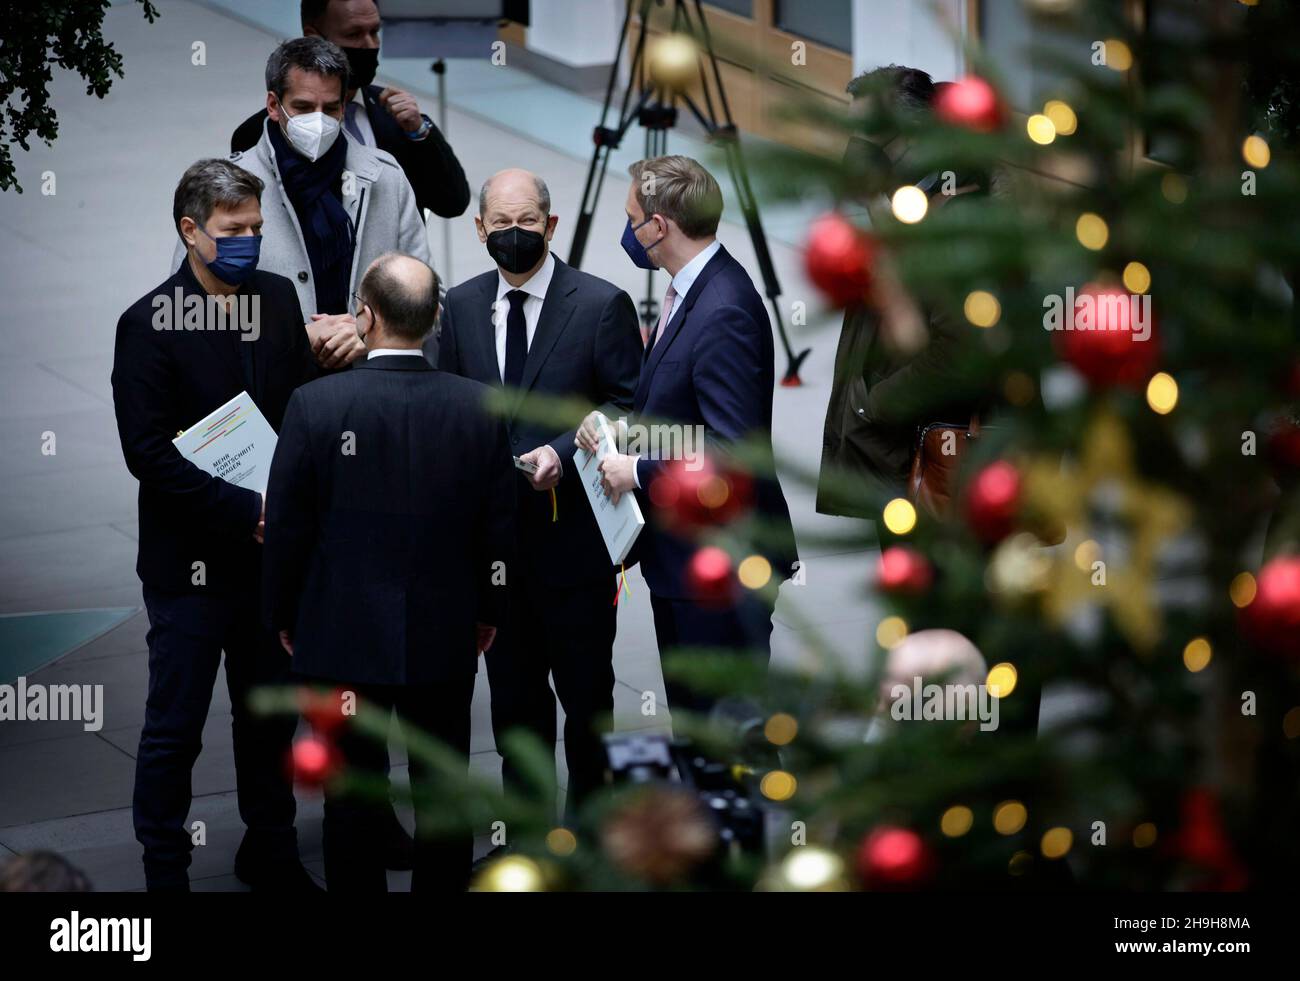 From left to right: Robert Habeck, designated Federal Minister for Economic Affairs and Climate Protection and Vice Chancellor, Olaf Scholz, designated Federal Chancellor, and Christian Lindner, designated Federal Minister of Finance, recorded in front of a Weihaftertsbaum in the house of the Federal Press Conference. Berlin, December 7th, 2021 Stock Photo